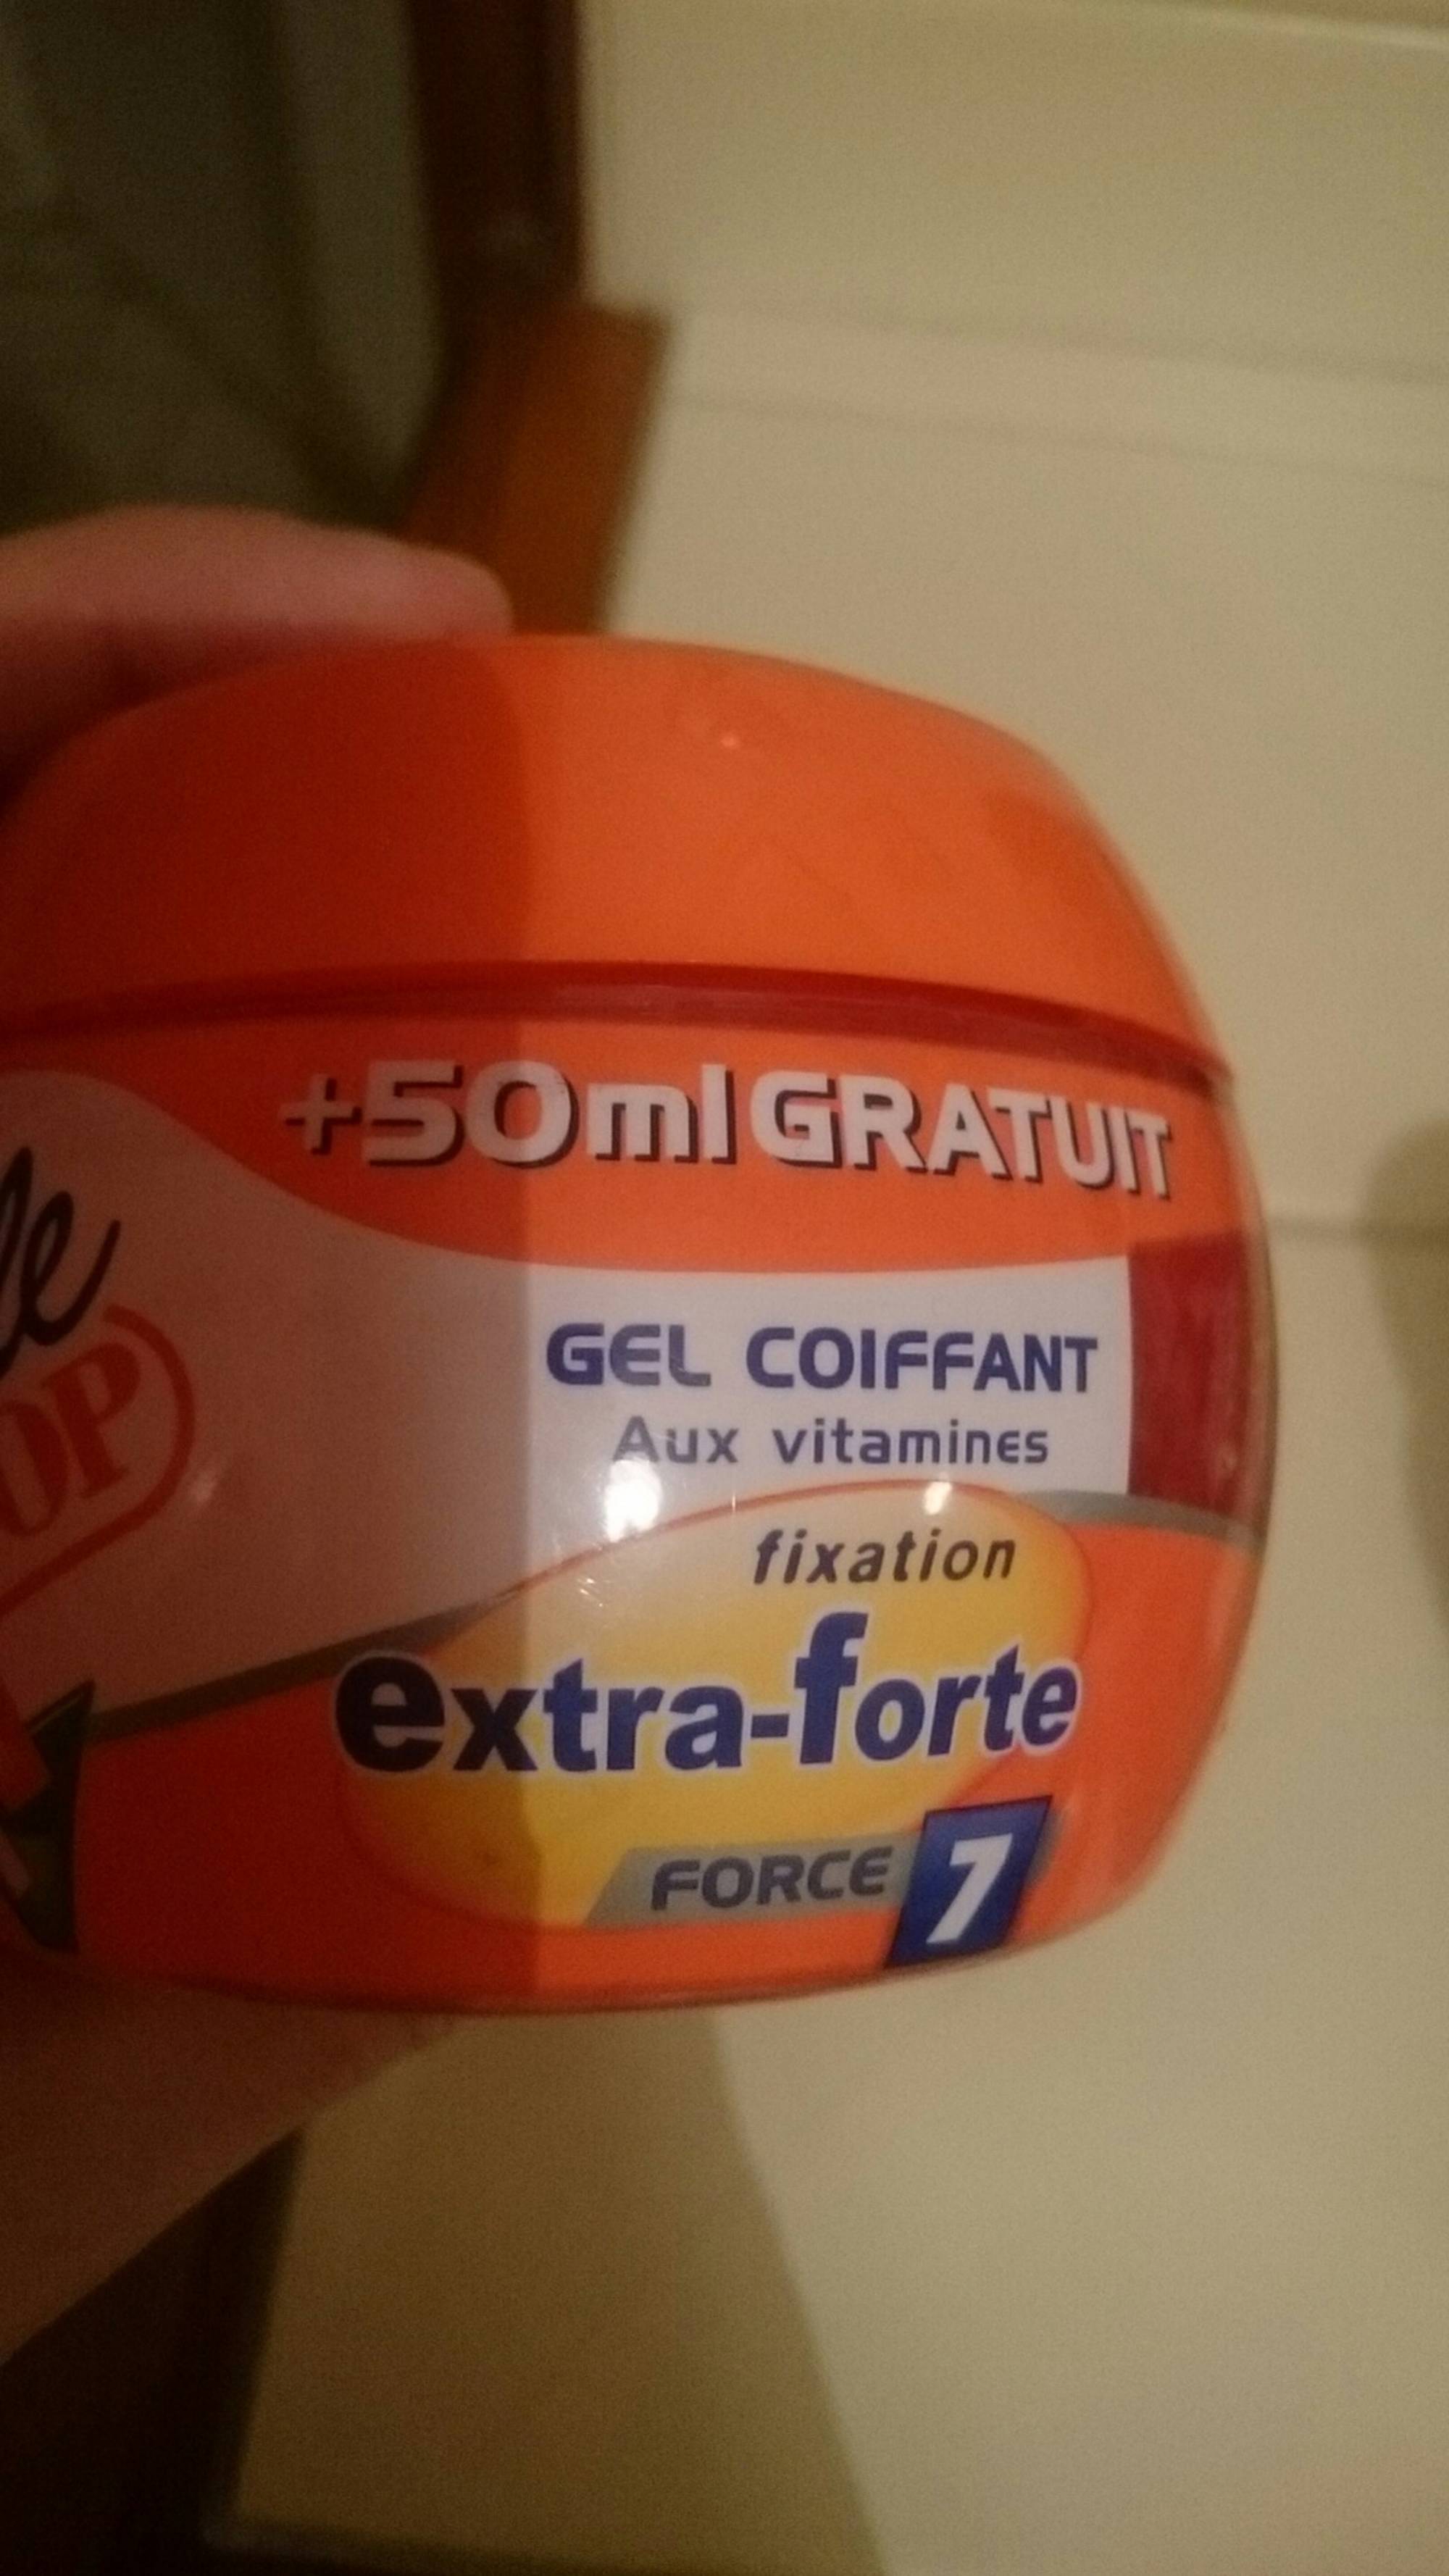 VIVELLE DOP - Gel coiffant aux vitamines fixation extra forte force 7